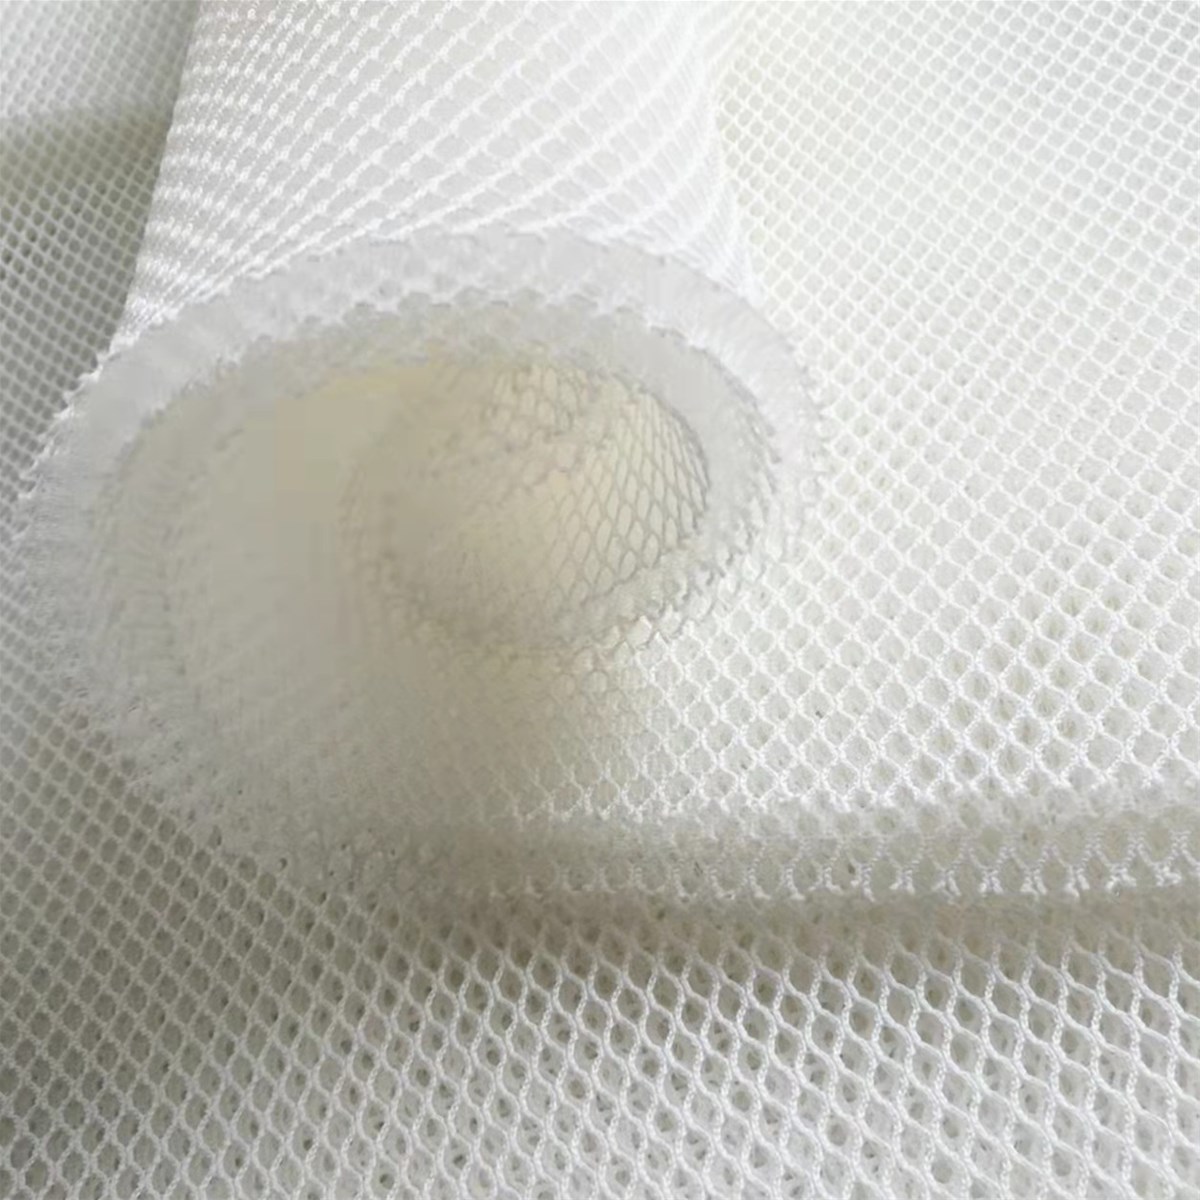 Antimoisture Mattress Ventiated Underlay by Breathable and Washable 3D Spacer Air Mesh Fabric